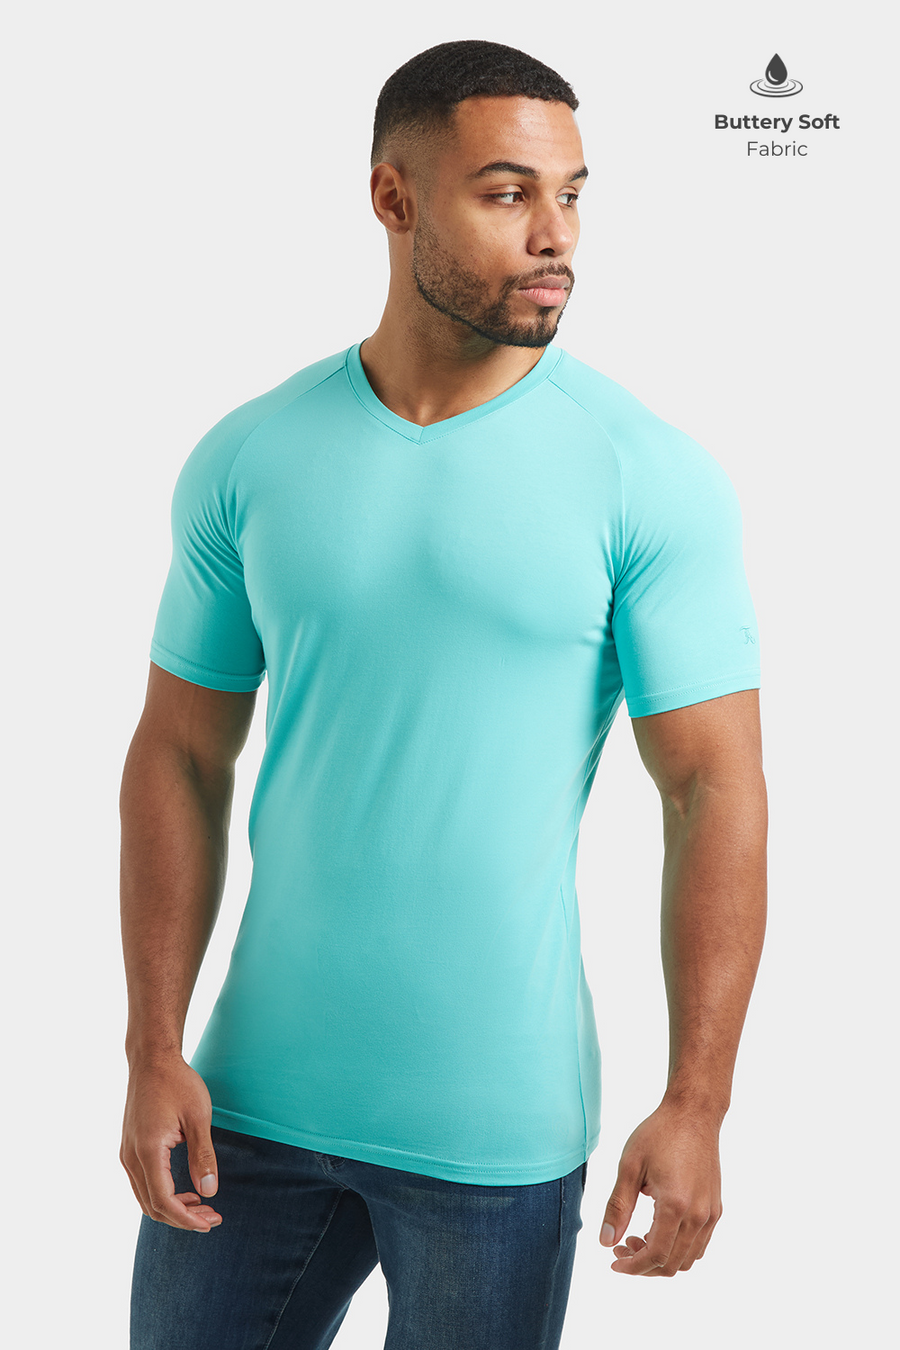 Premium Athletic Fit V-Neck in Spearmint - TAILORED ATHLETE - USA